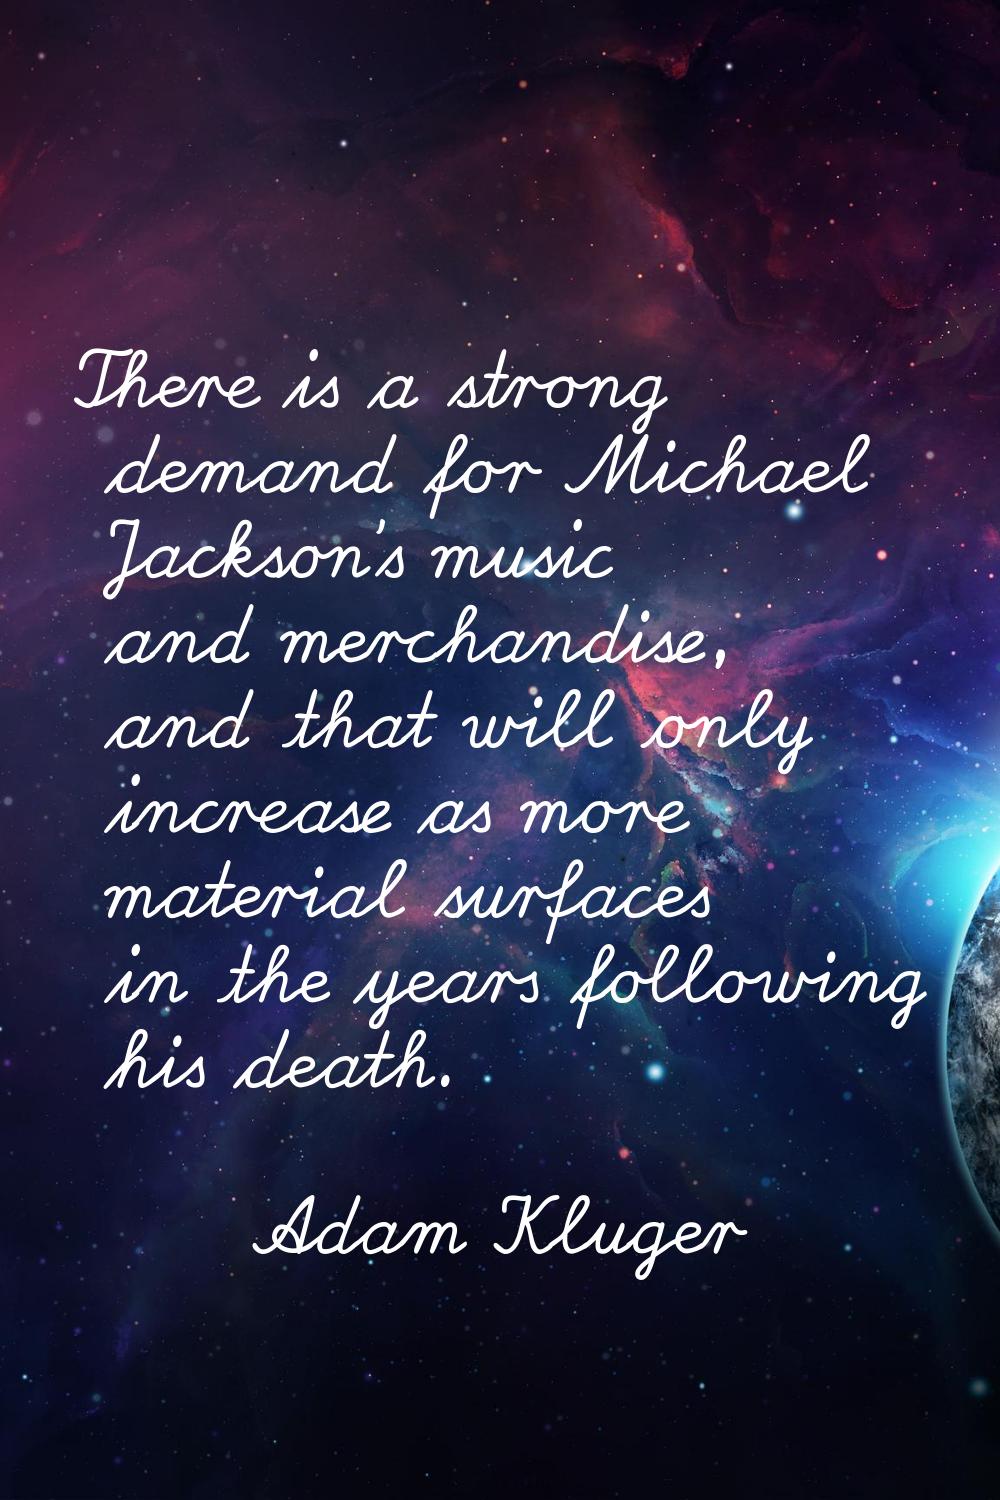 There is a strong demand for Michael Jackson's music and merchandise, and that will only increase a